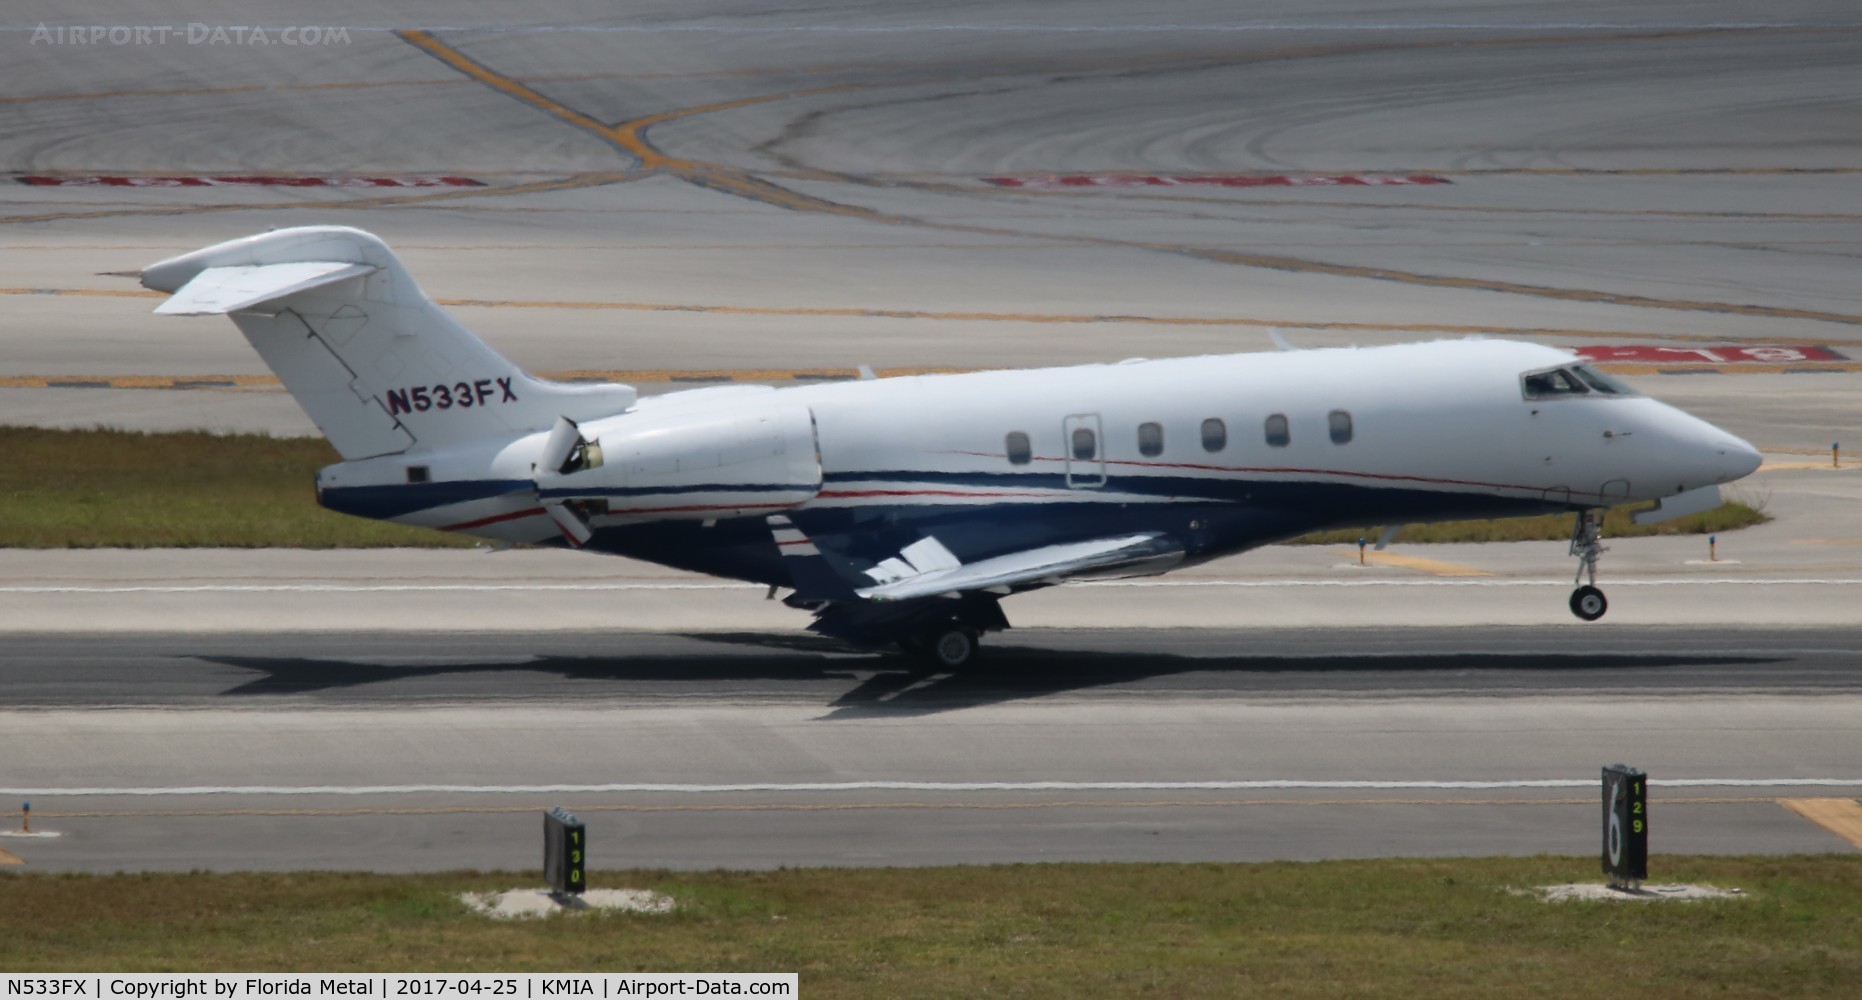 N533FX, 2007 Bombardier Challenger 300 (BD-100-1A10) C/N 20160, Challenger 300 zx